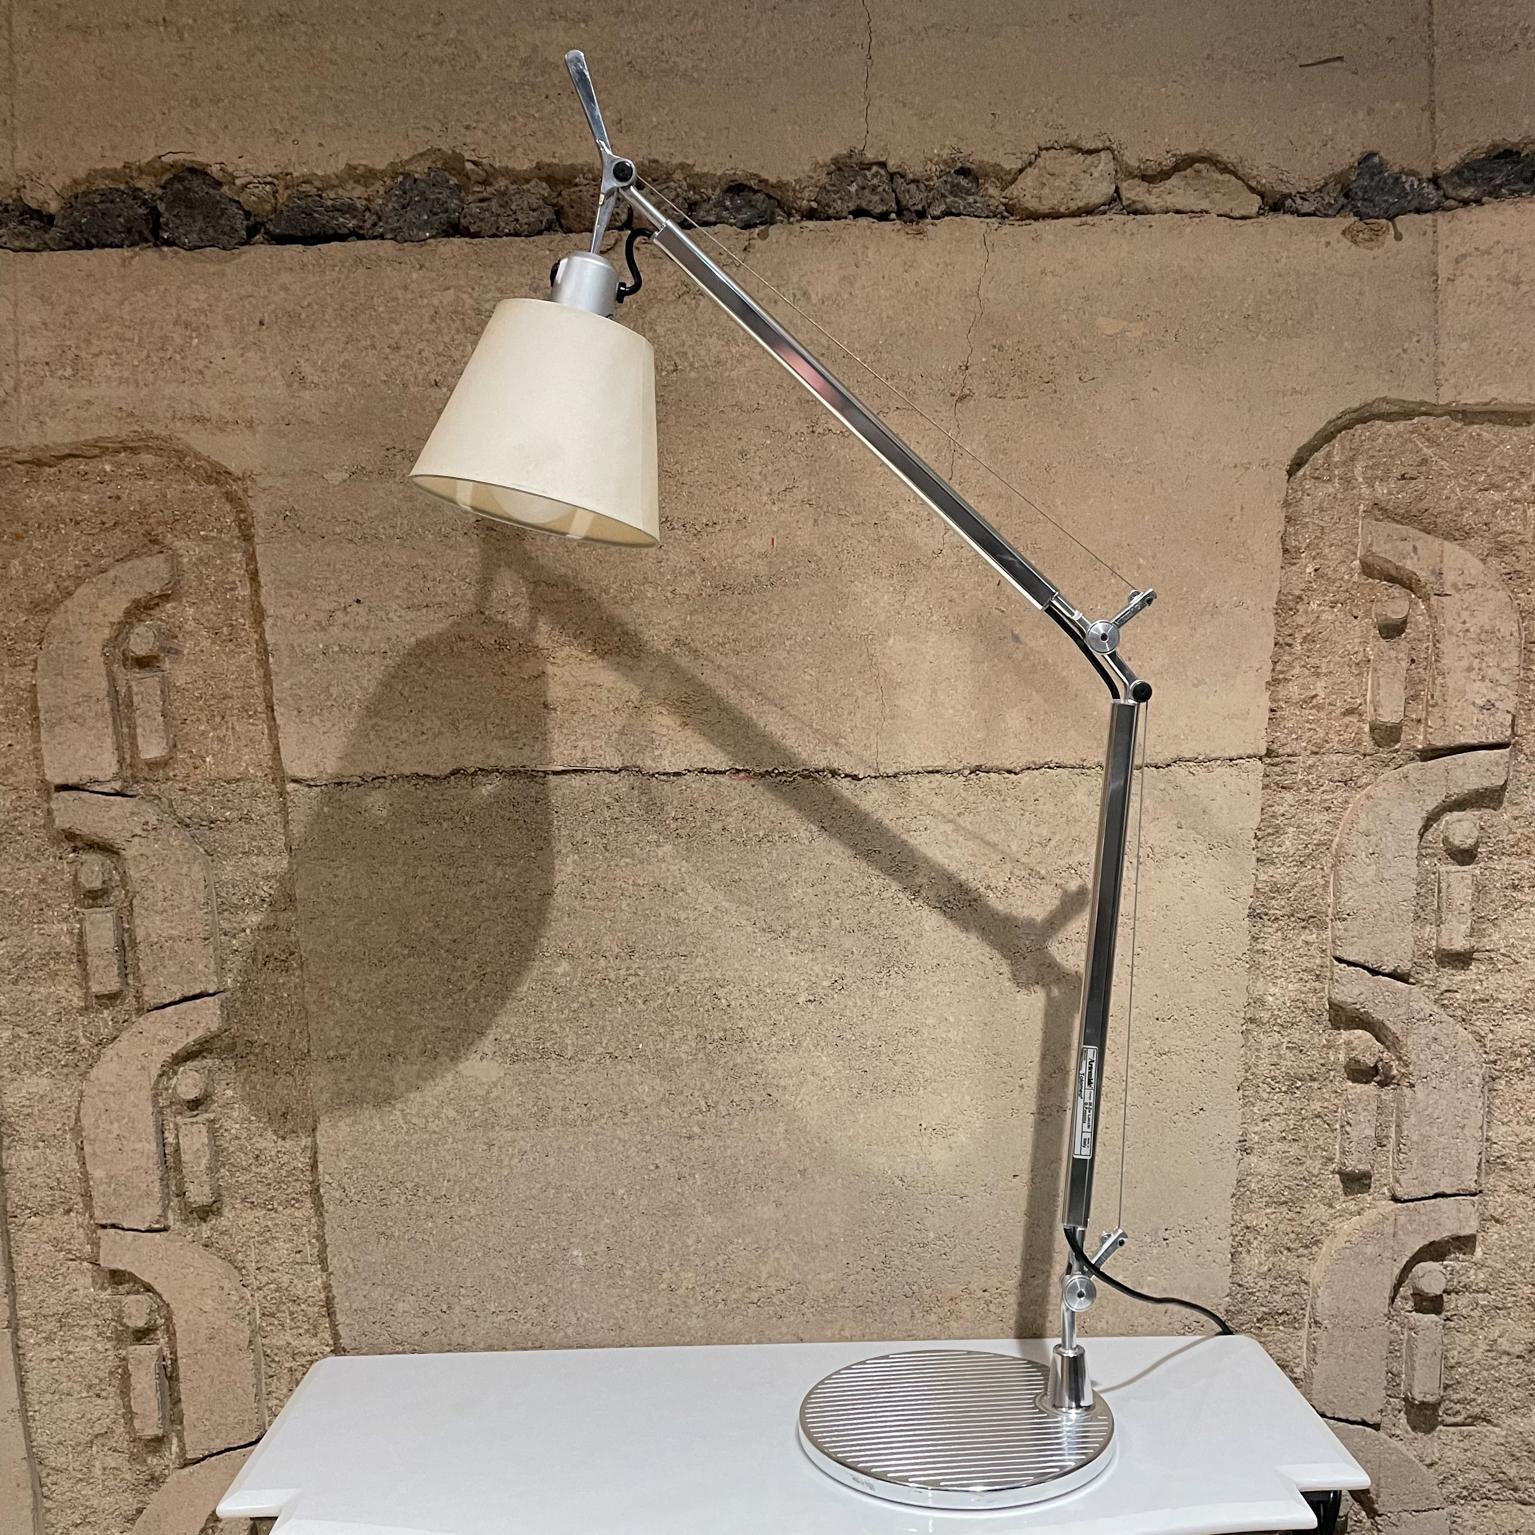 1980s Italian Classic table lamp adjustable with shade. 
Tolomeo for Artemide Milano, Italy 
Providing balance and movement, the Tolomeo table lamp is designed for adjustable direction of light.
Created for Artemide in 1987 by Michele De Lucchi and